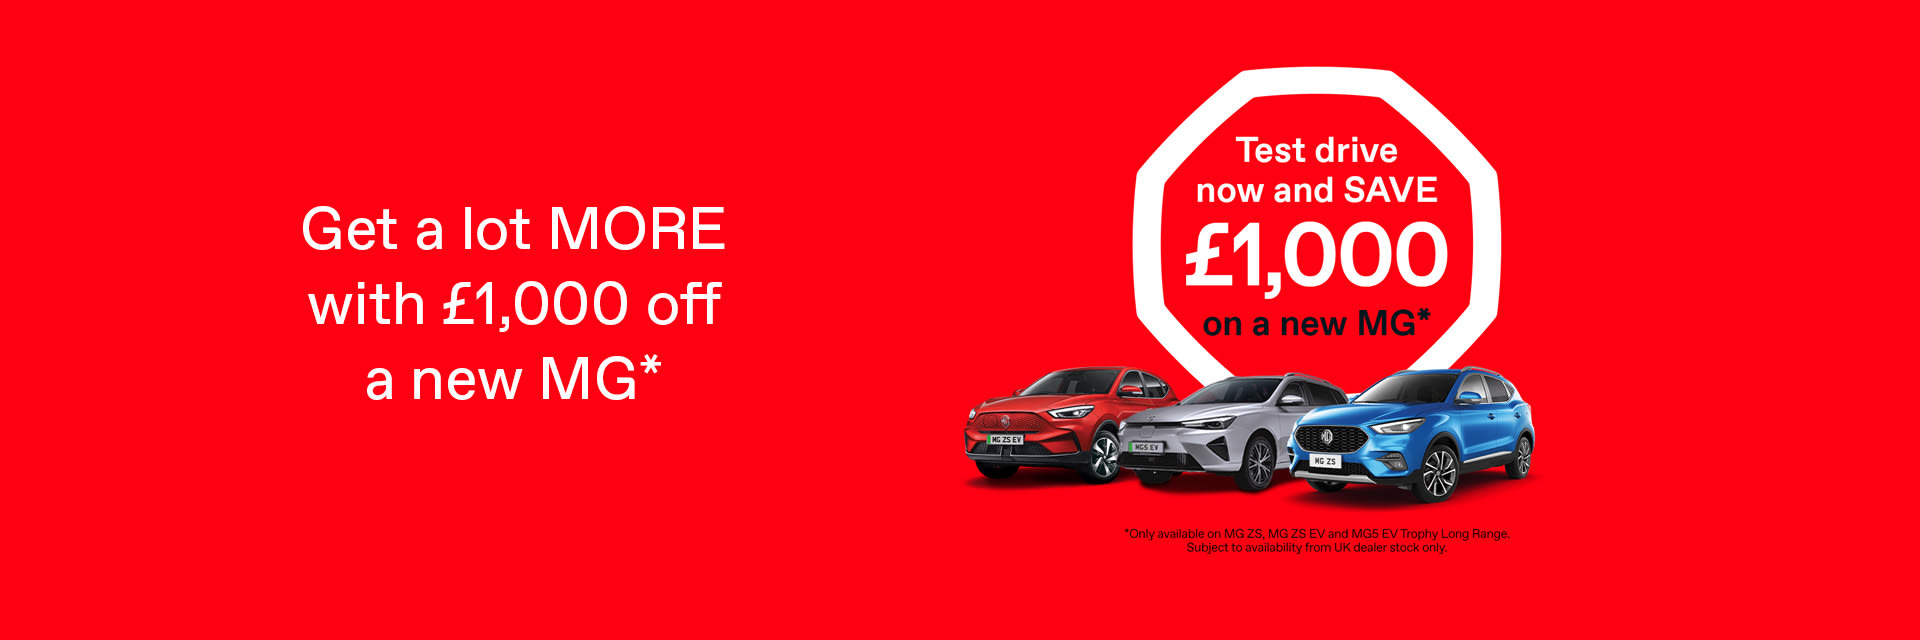 Get a lot MORE with £1,000 off a new MG*